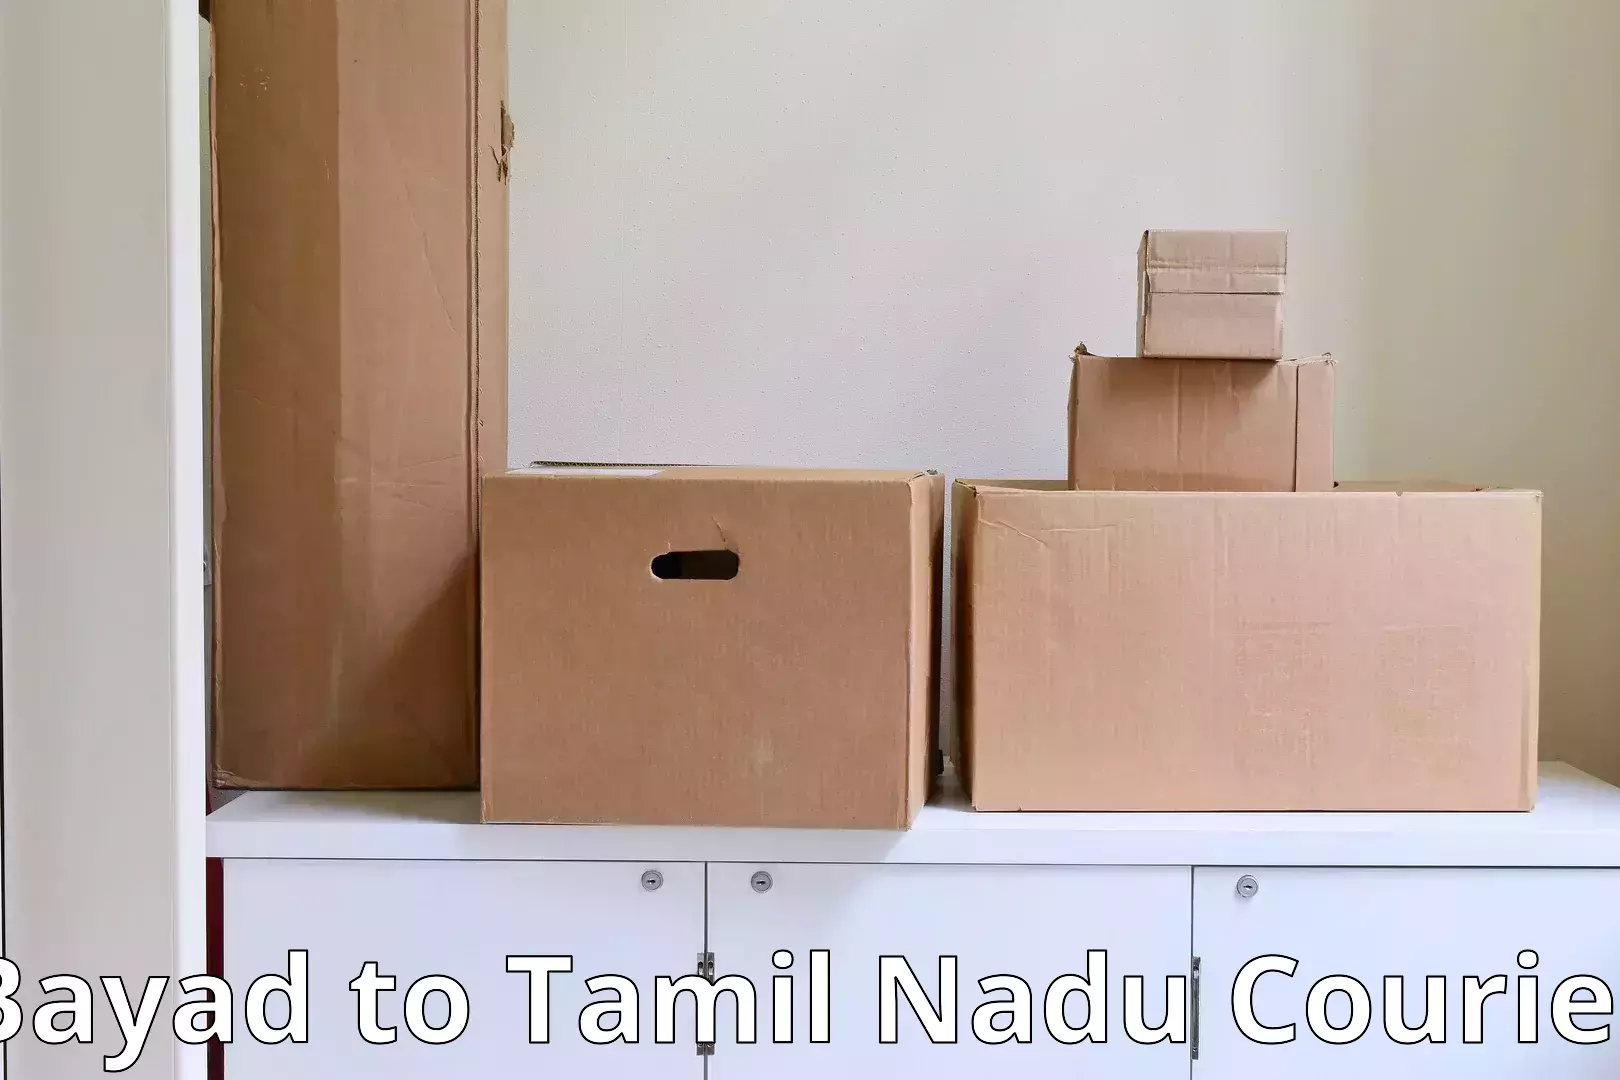 Furniture delivery service in Bayad to Tamil Nadu